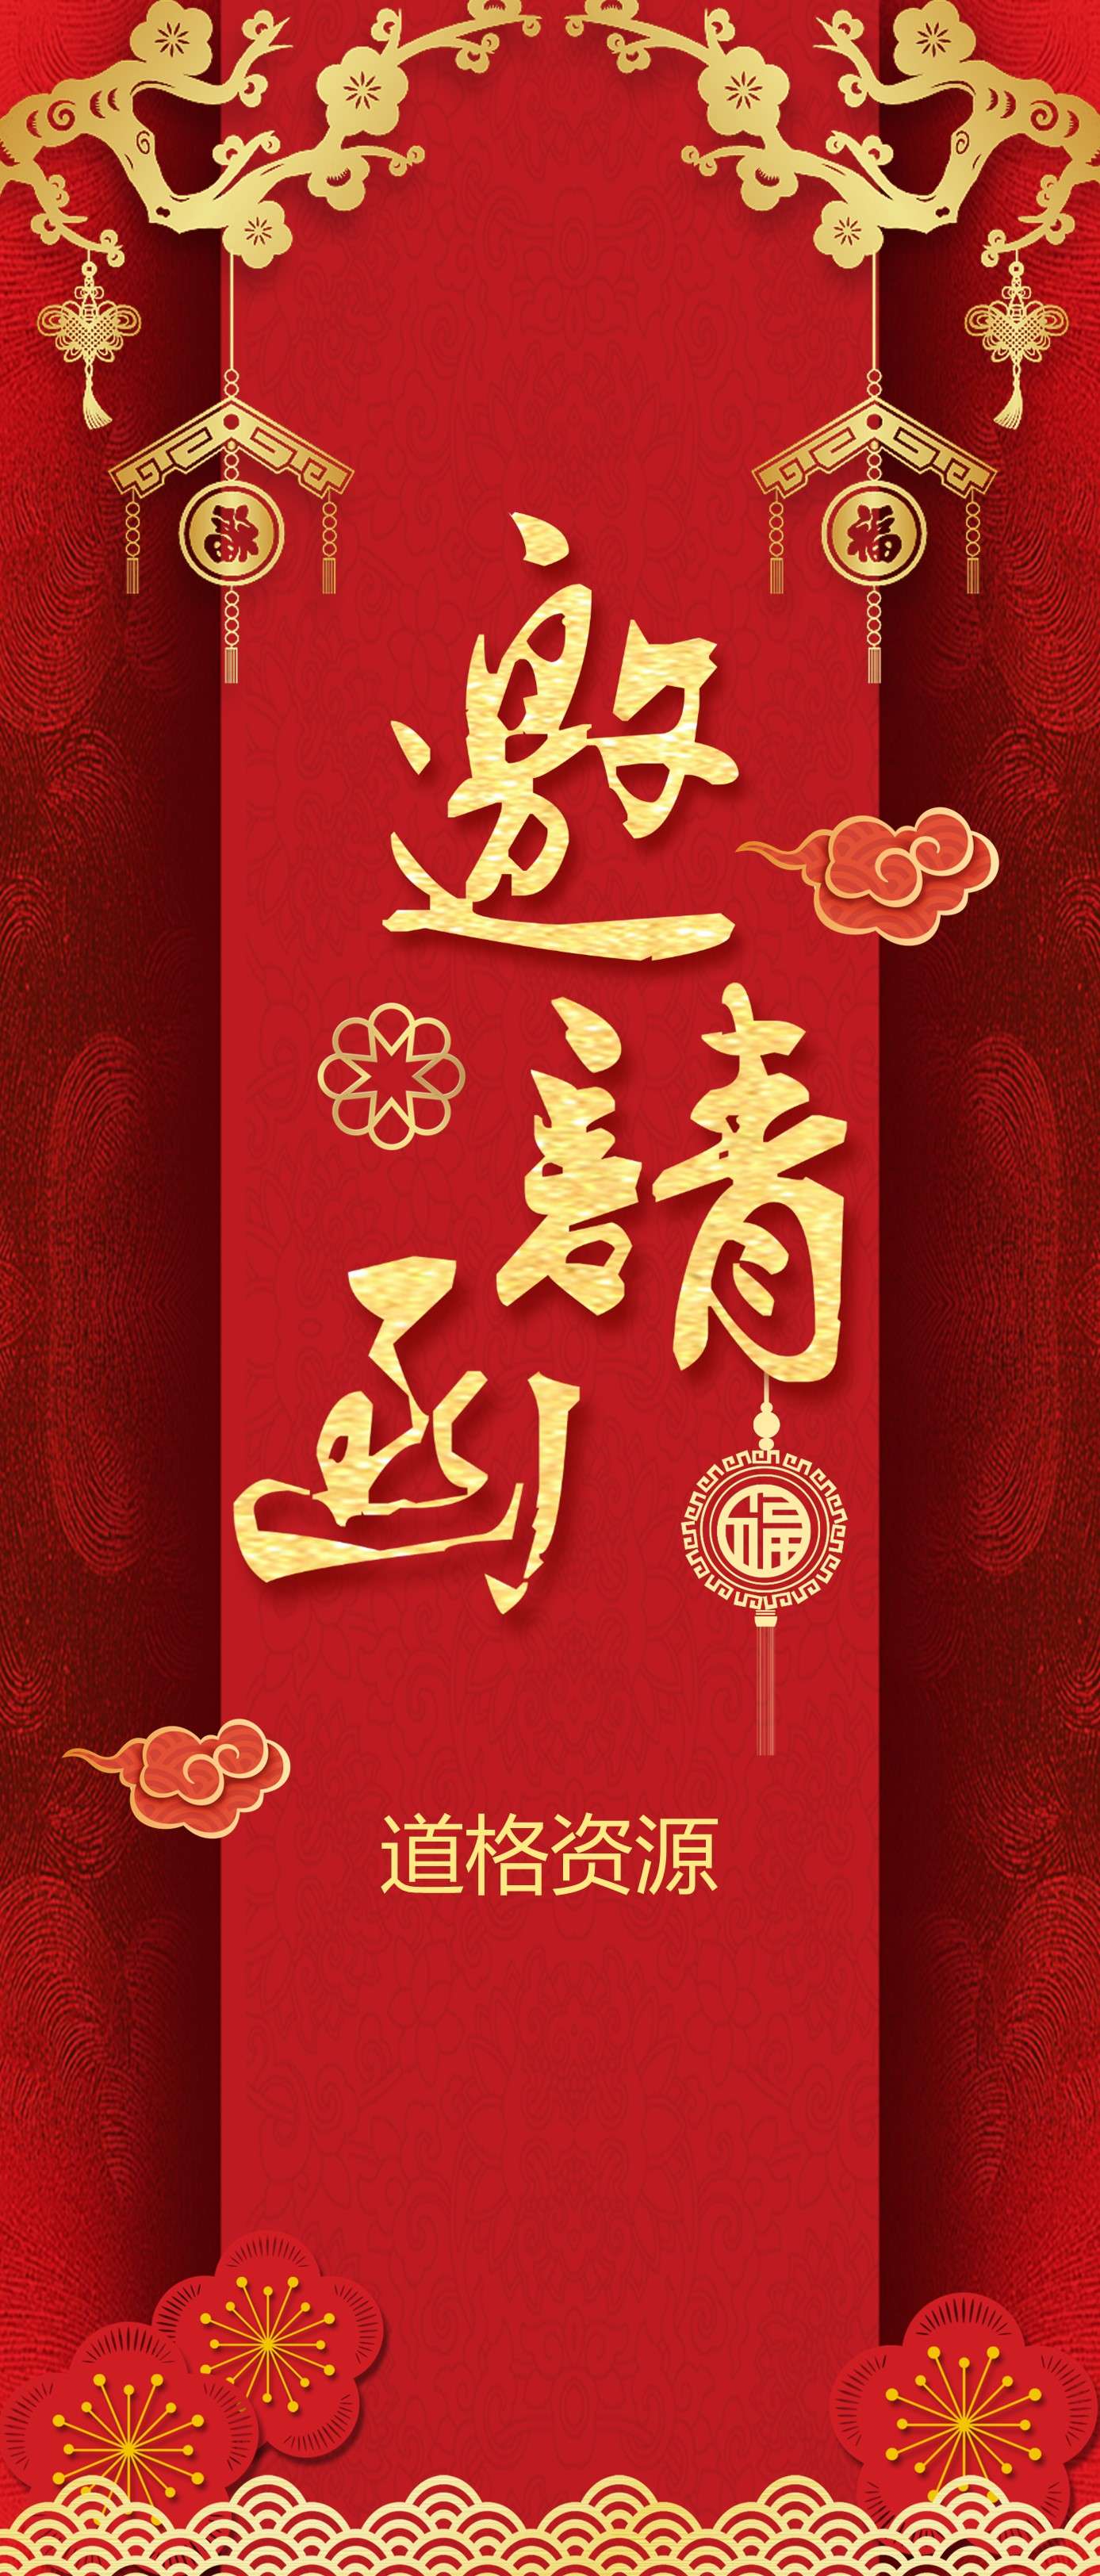 2020 Year of the Rat Red Festive Creative Annual Meeting Invitation Letter Vertical PPT Template